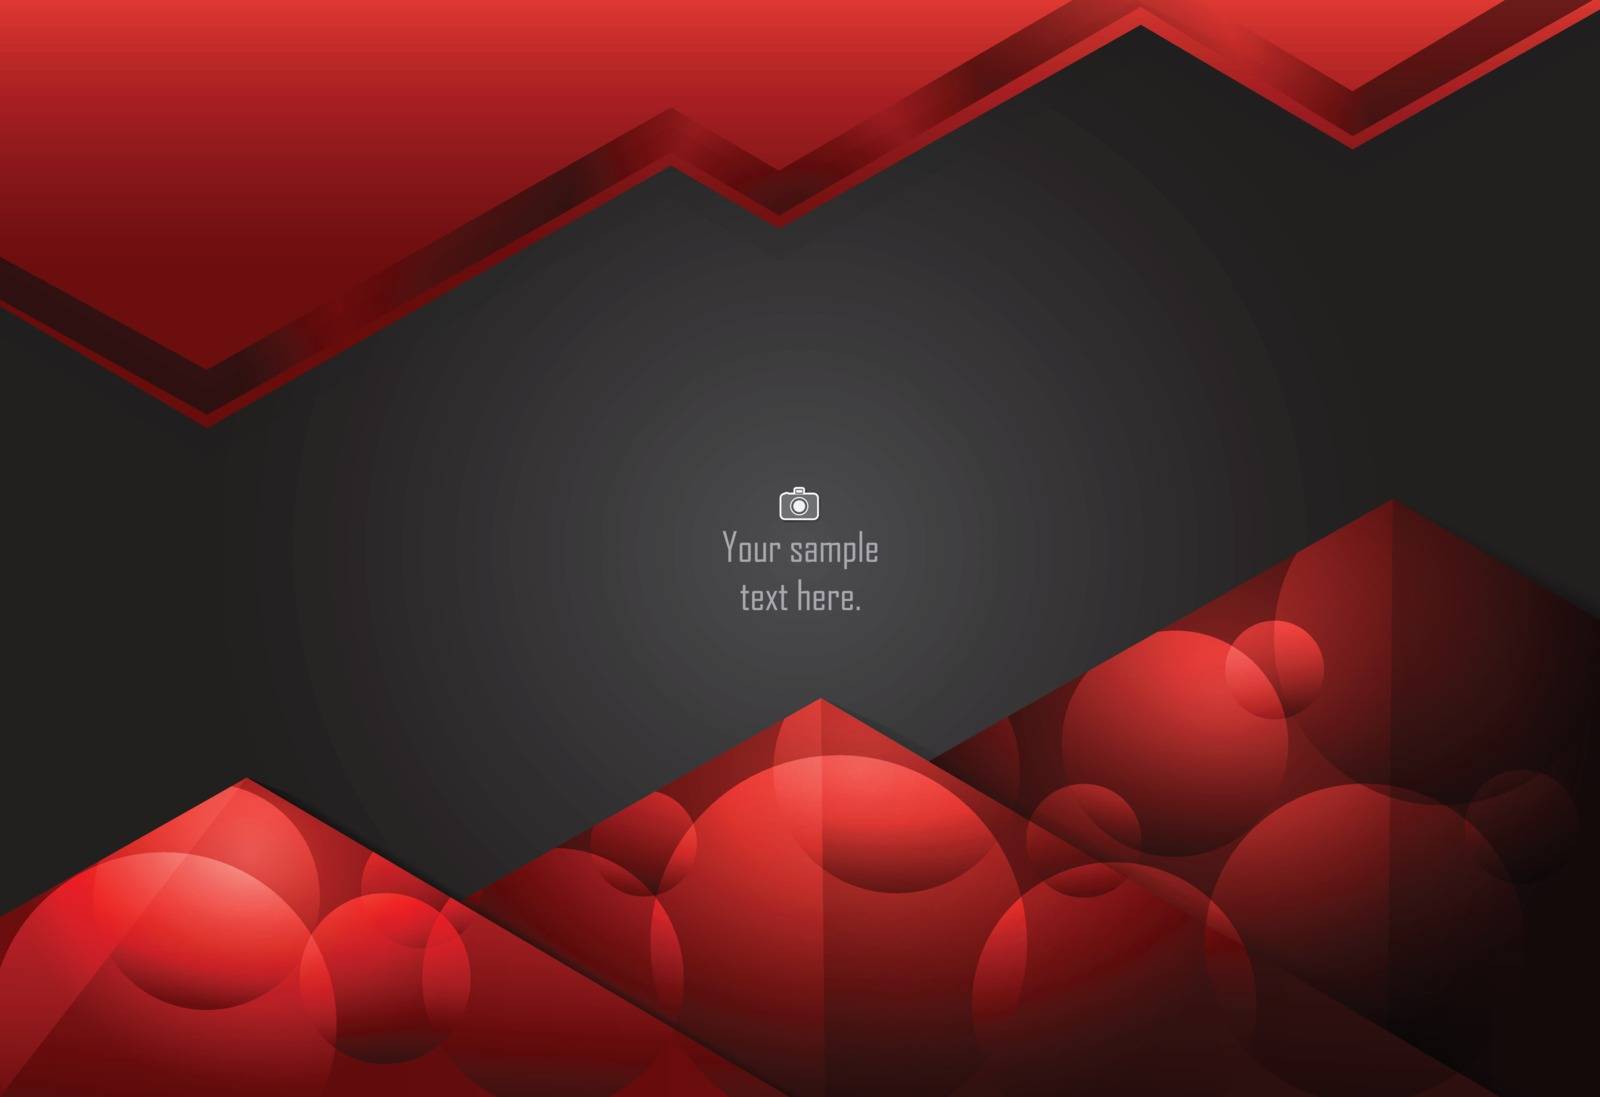 Red and black abstract material design for background, card, annual business report, brochure, poster template